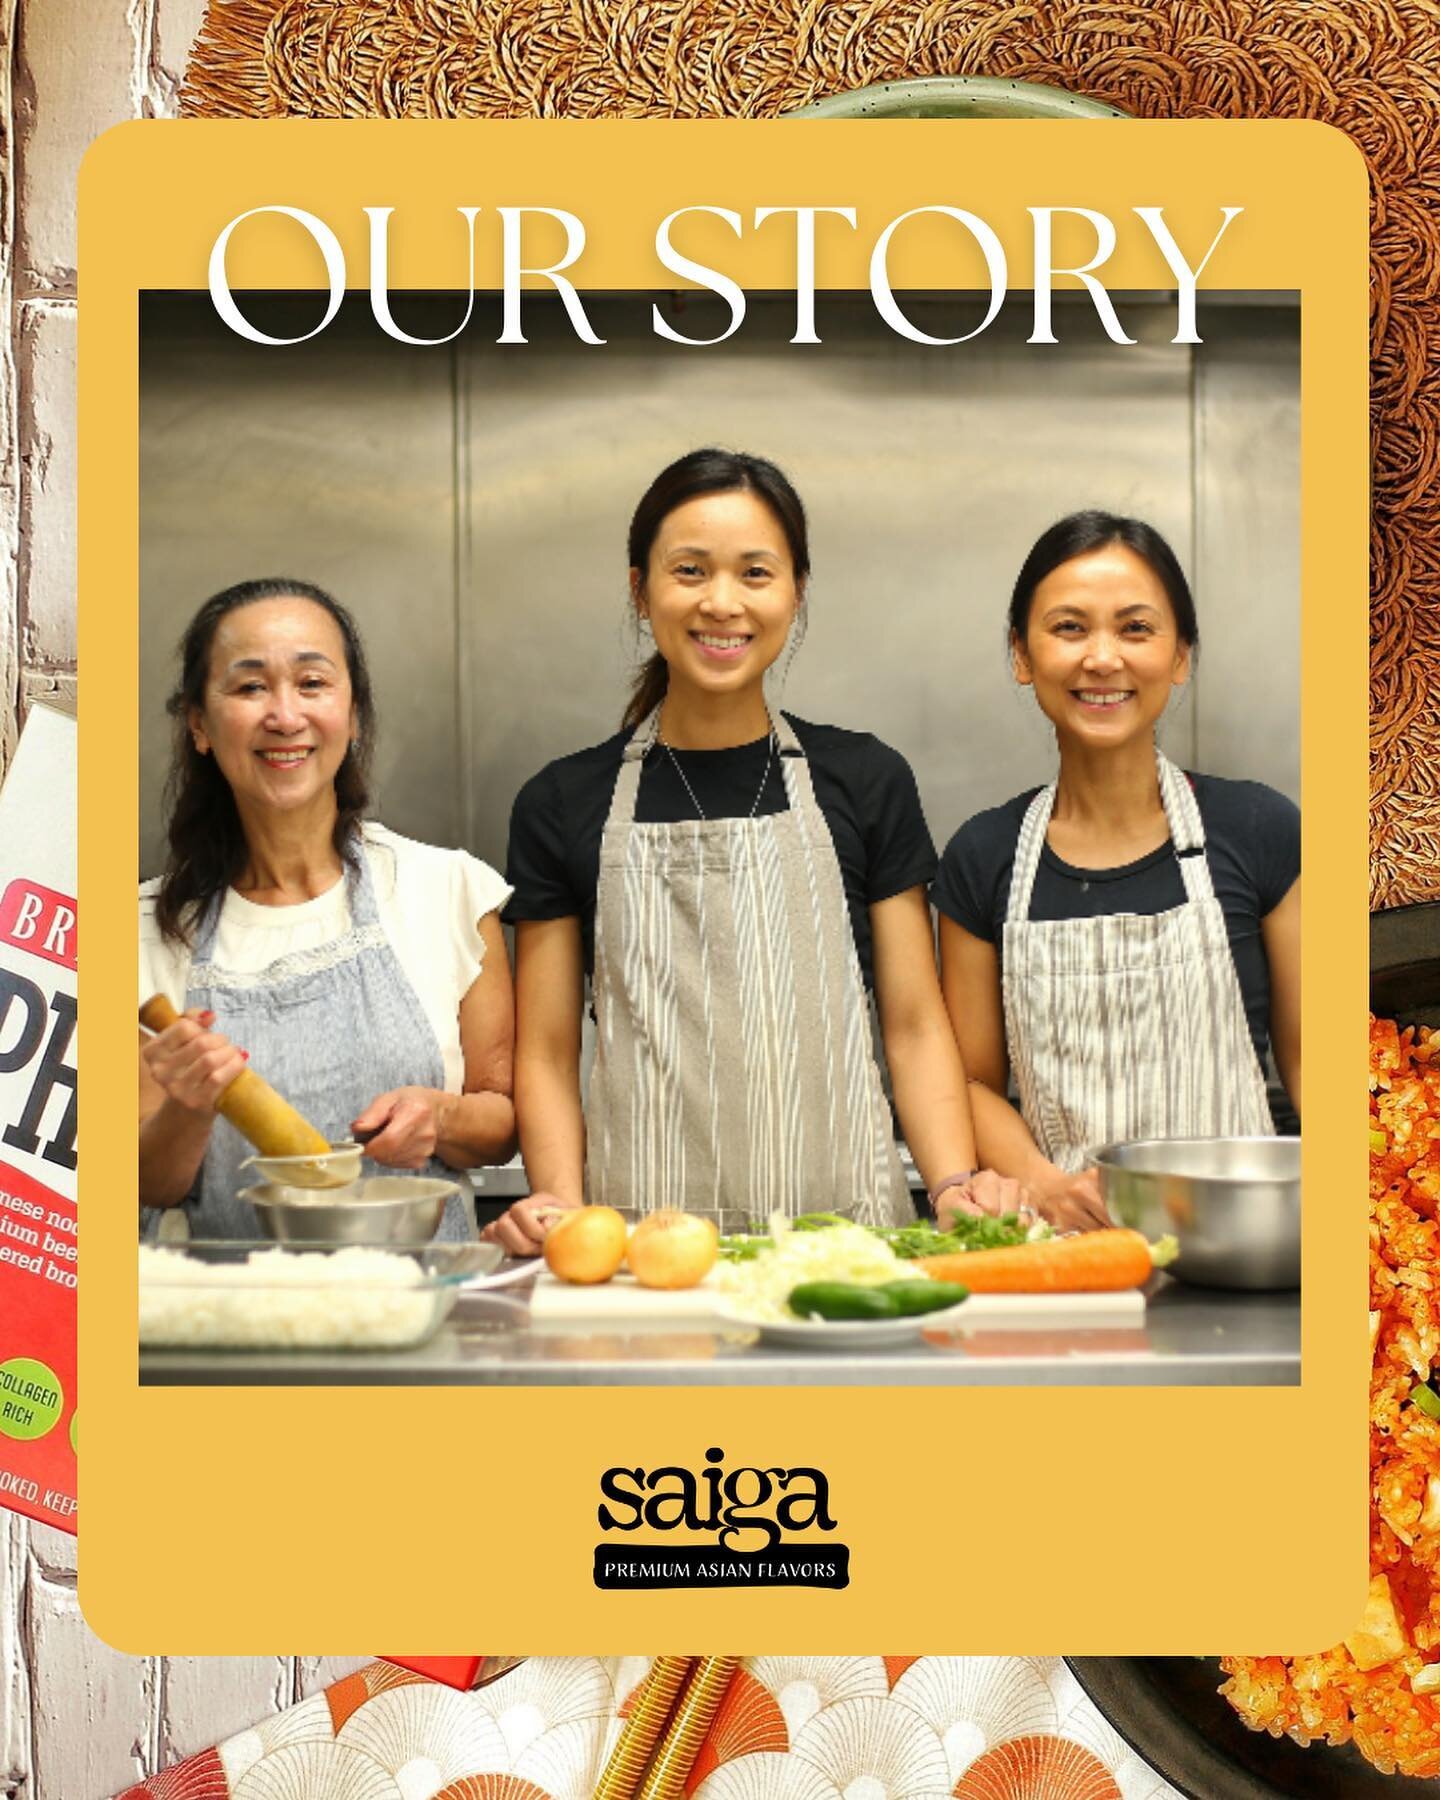 Allow us to reintroduce ourselves 🍜✨

Meet our founders Thu, Tram, &amp; Mimi:

Our story began with a shared love for authentic Asian dishes and a shared desire to create nostalgic, convenient meals that never compromise on taste or quality. 🍴

We